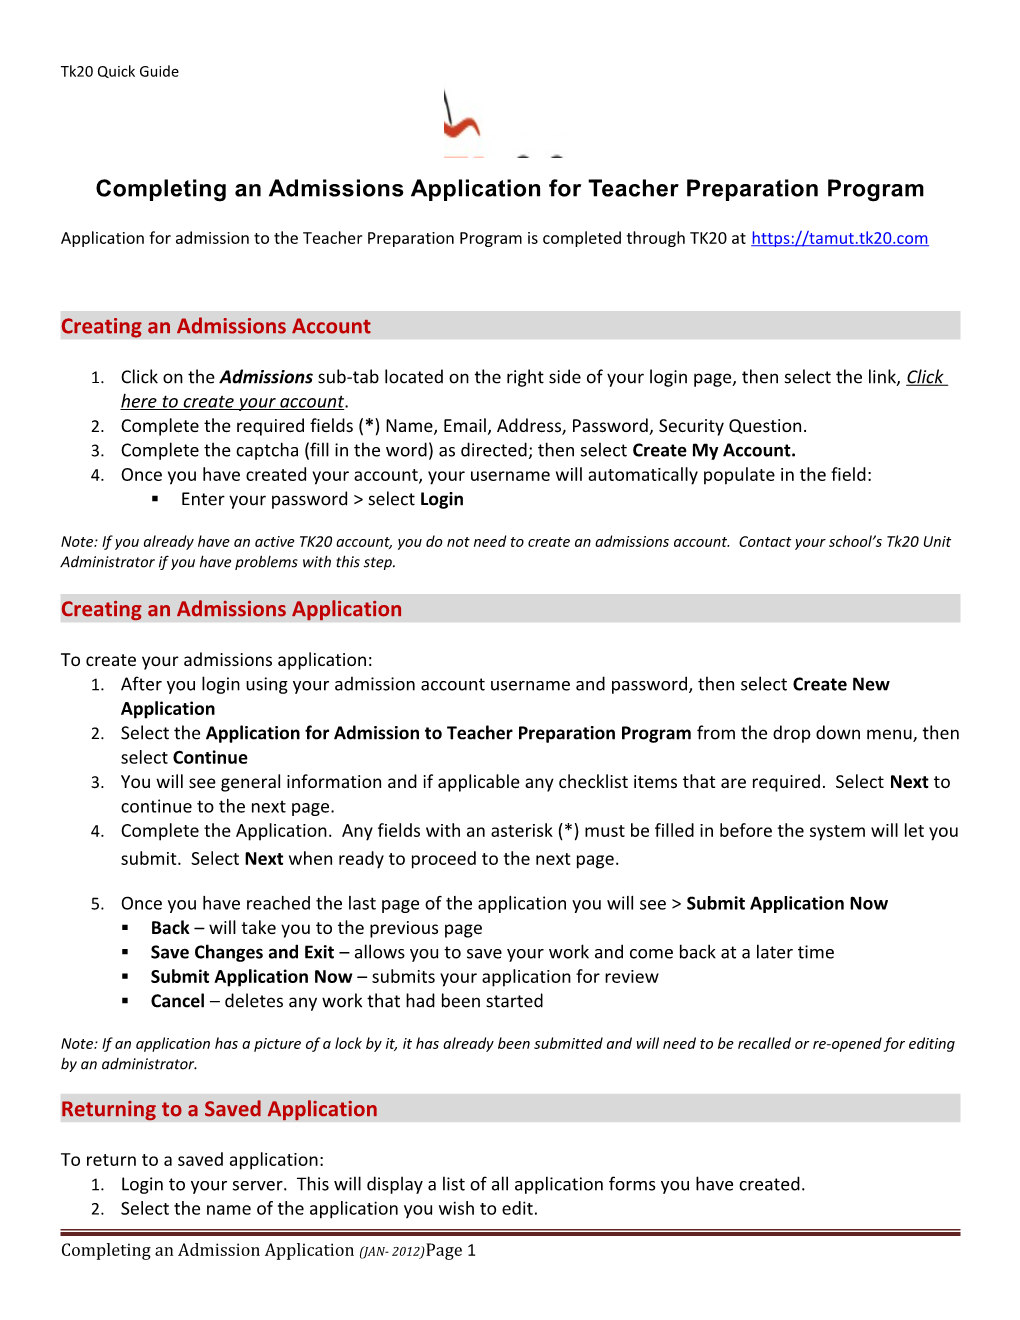 Completing an Admissions Applicationfor Teacher Preparation Program